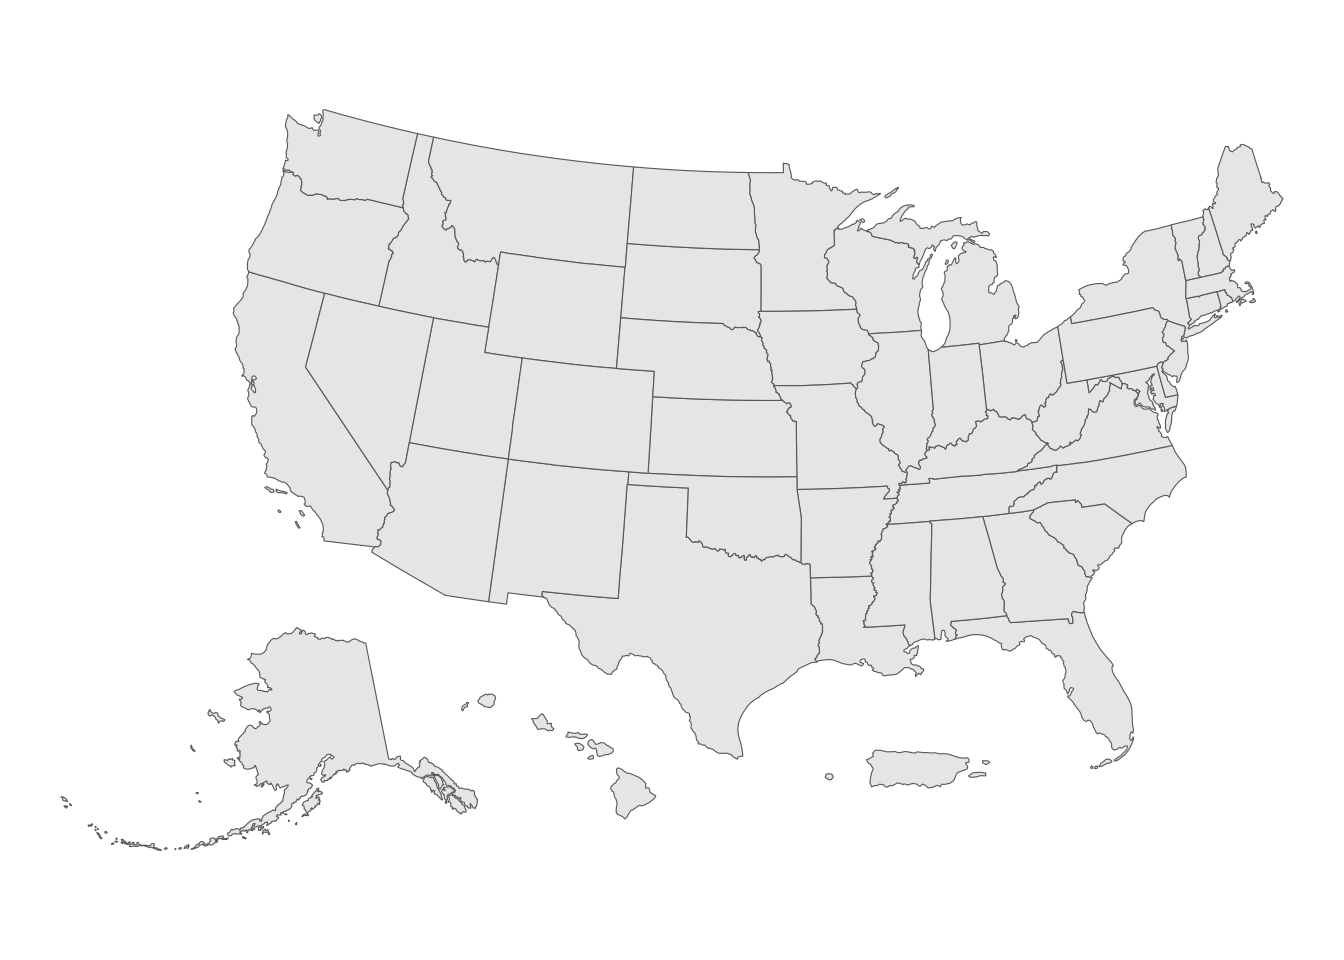 US states with shifted and rescaled geometry